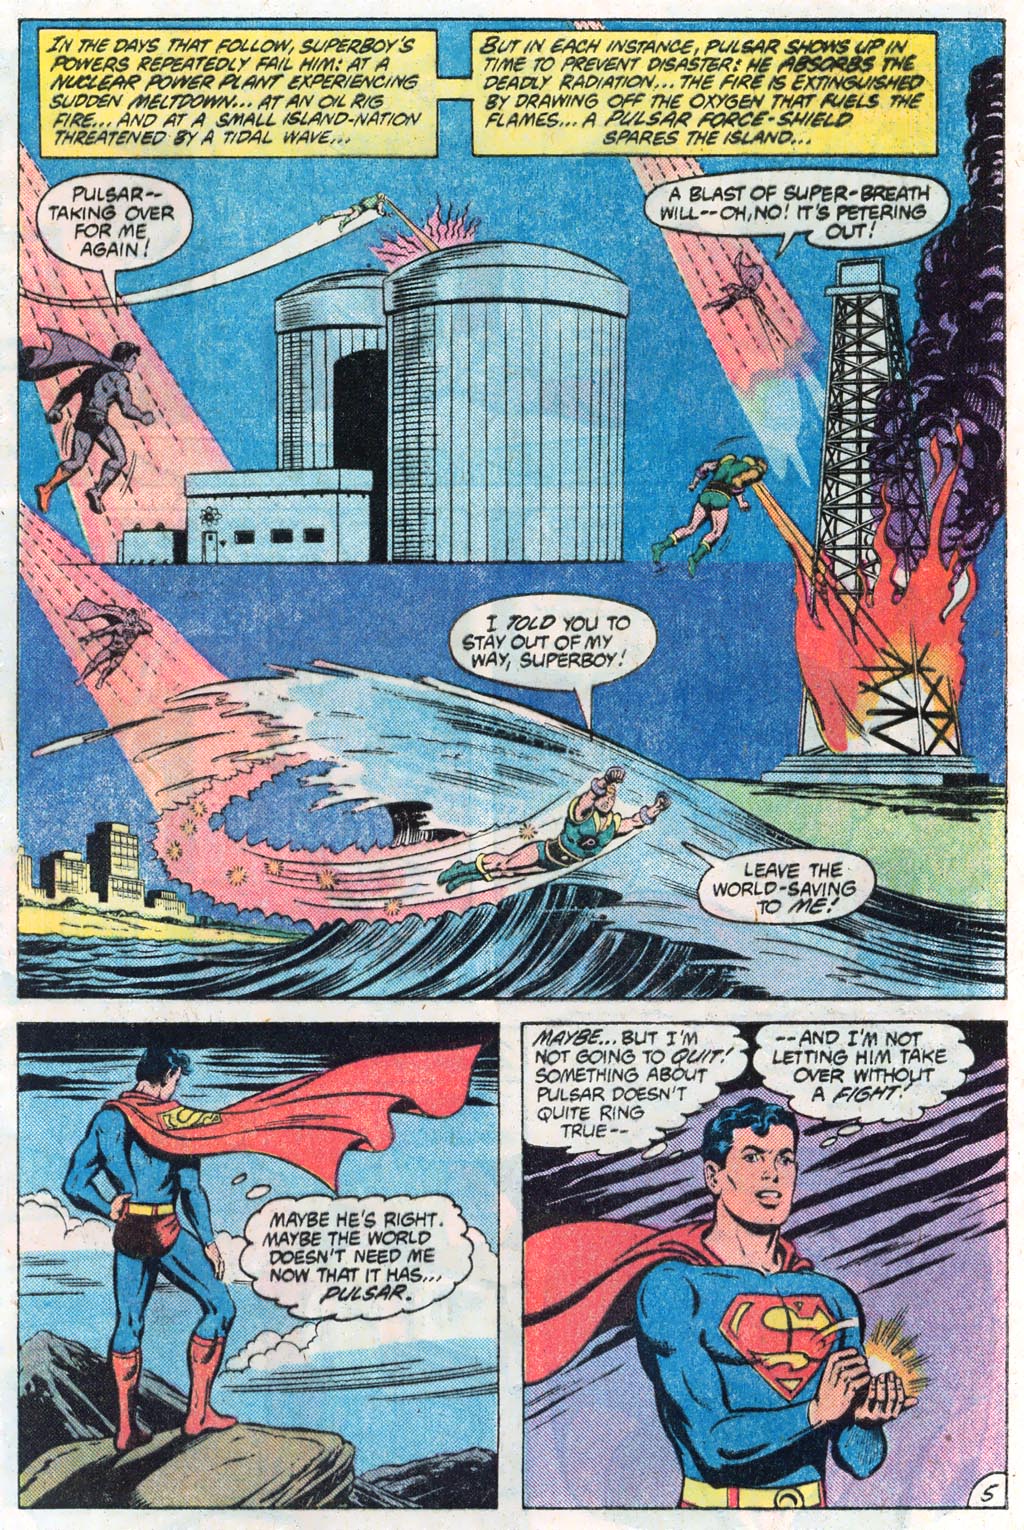 The New Adventures of Superboy 31 Page 8